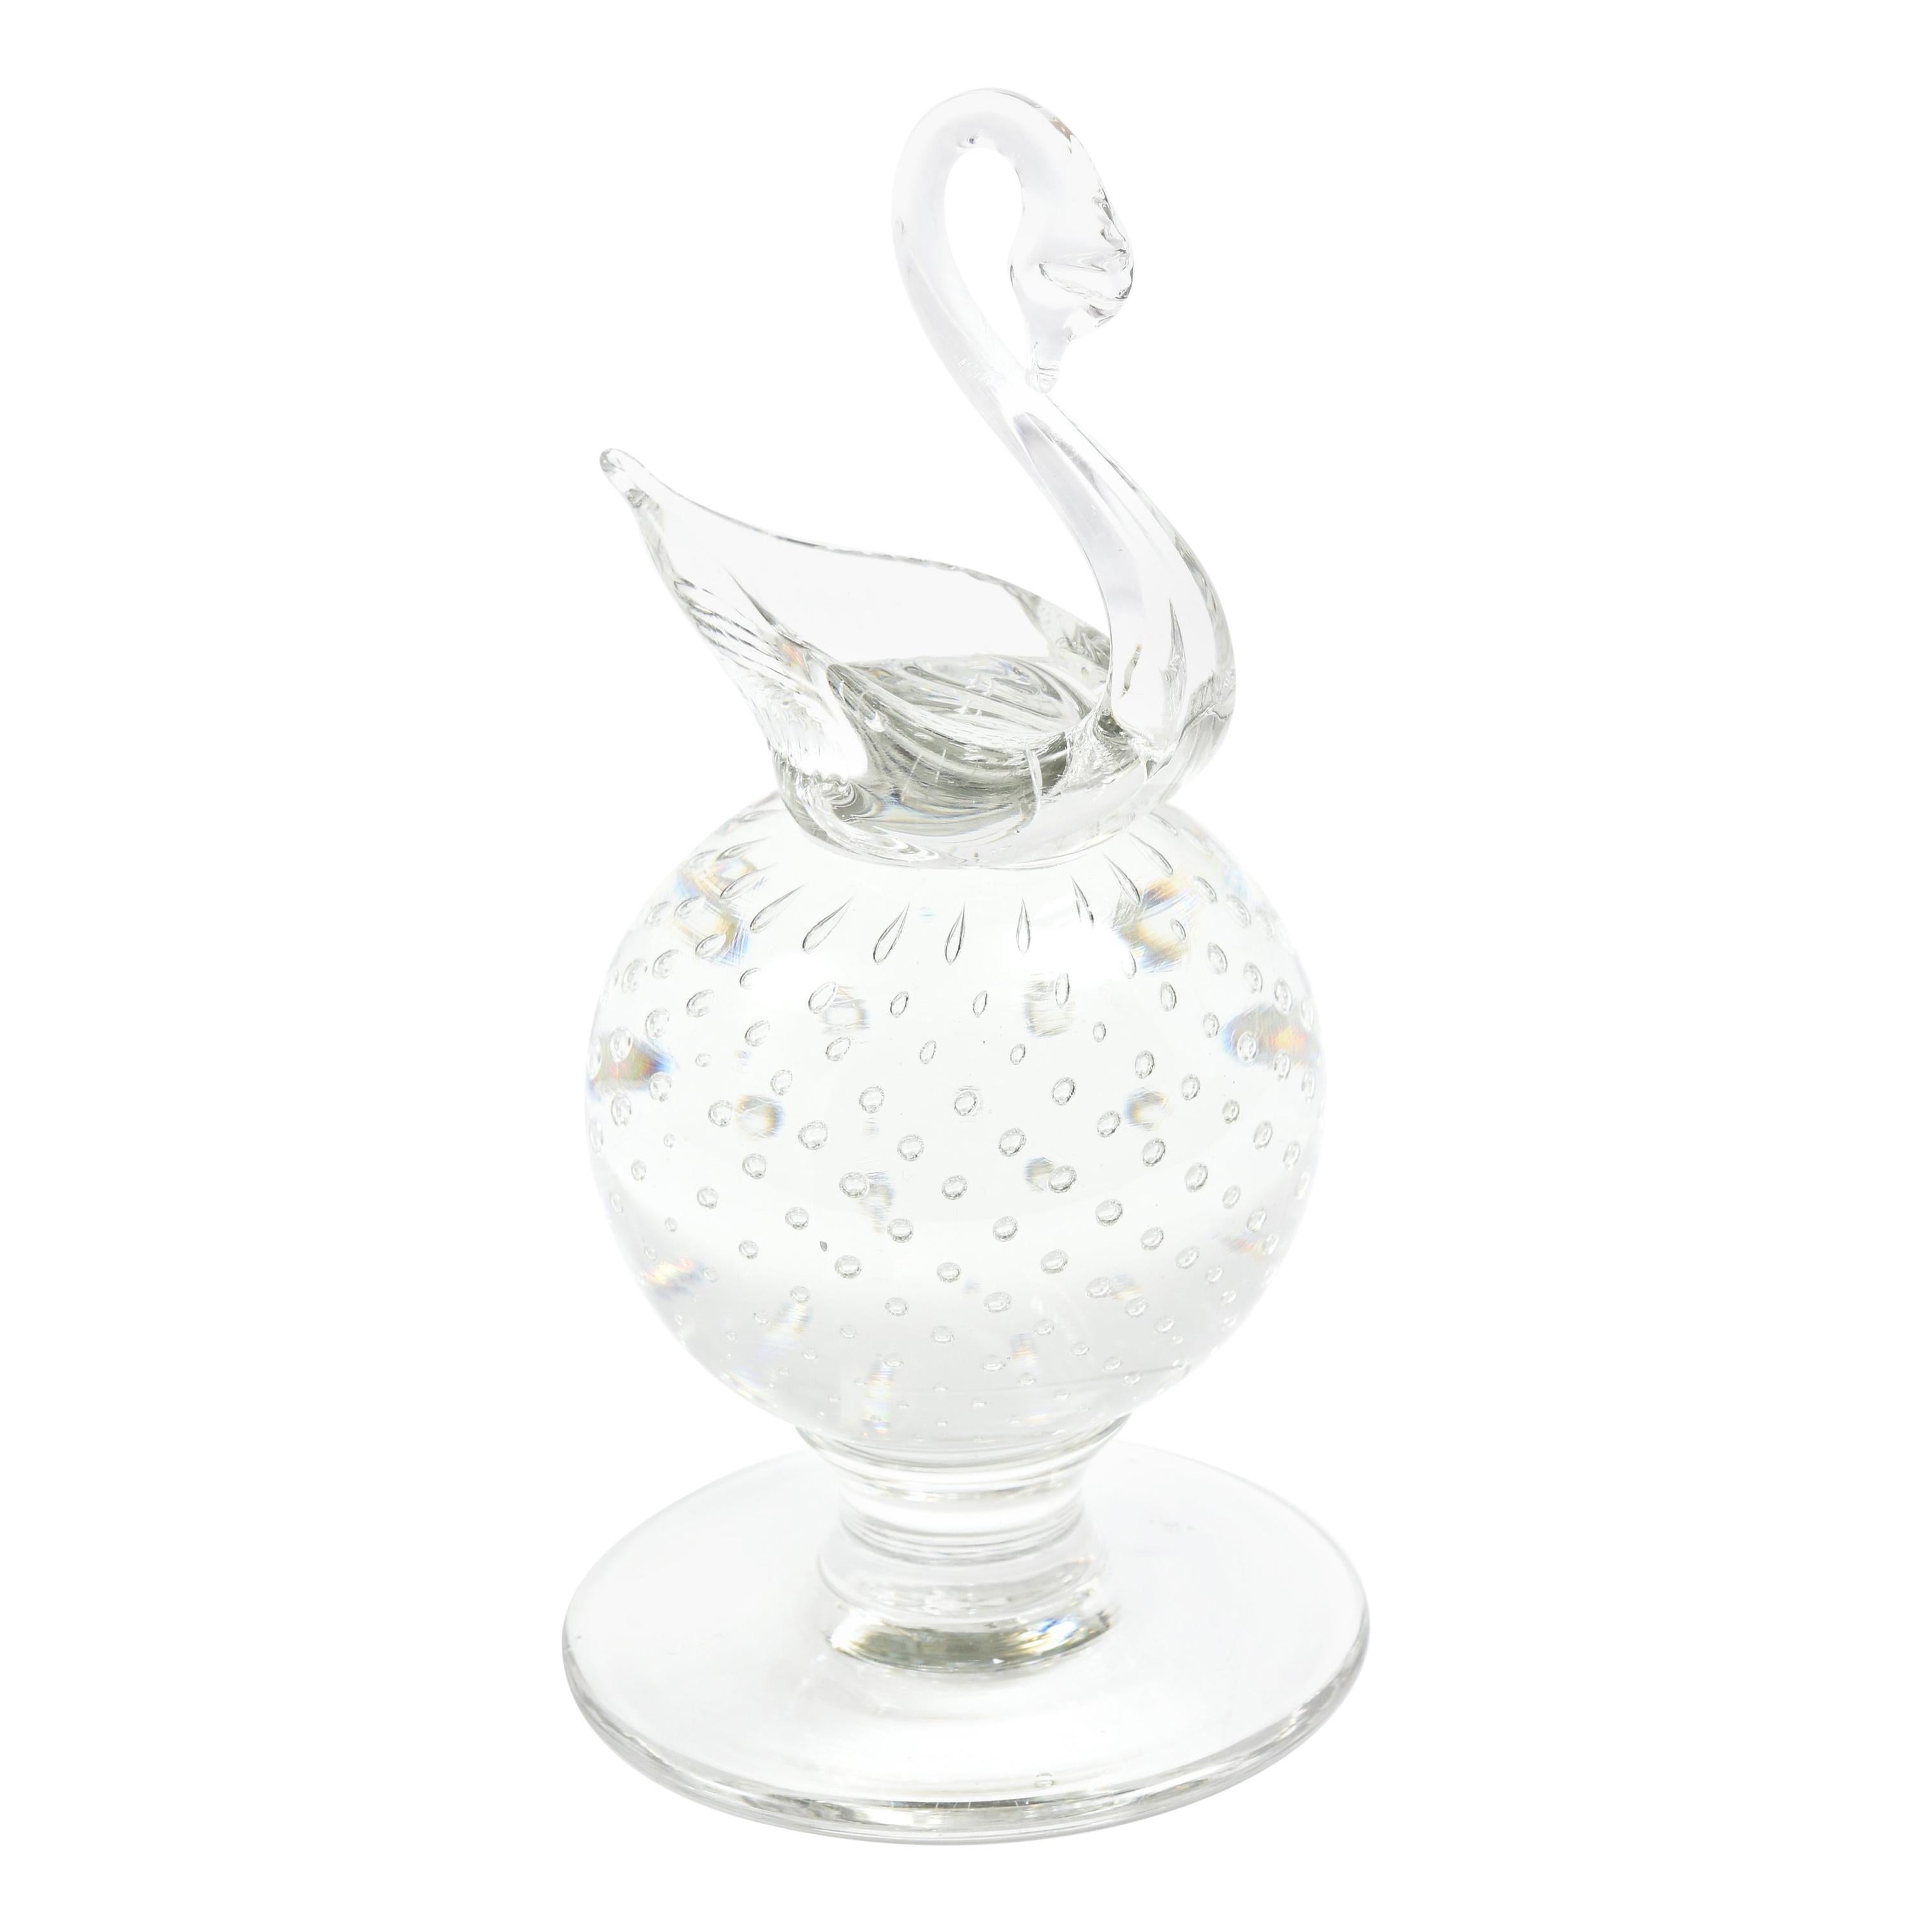 Pairpoint Blown Glass Paperweight, Figural Swan Motif, Vintage, circa 1950s